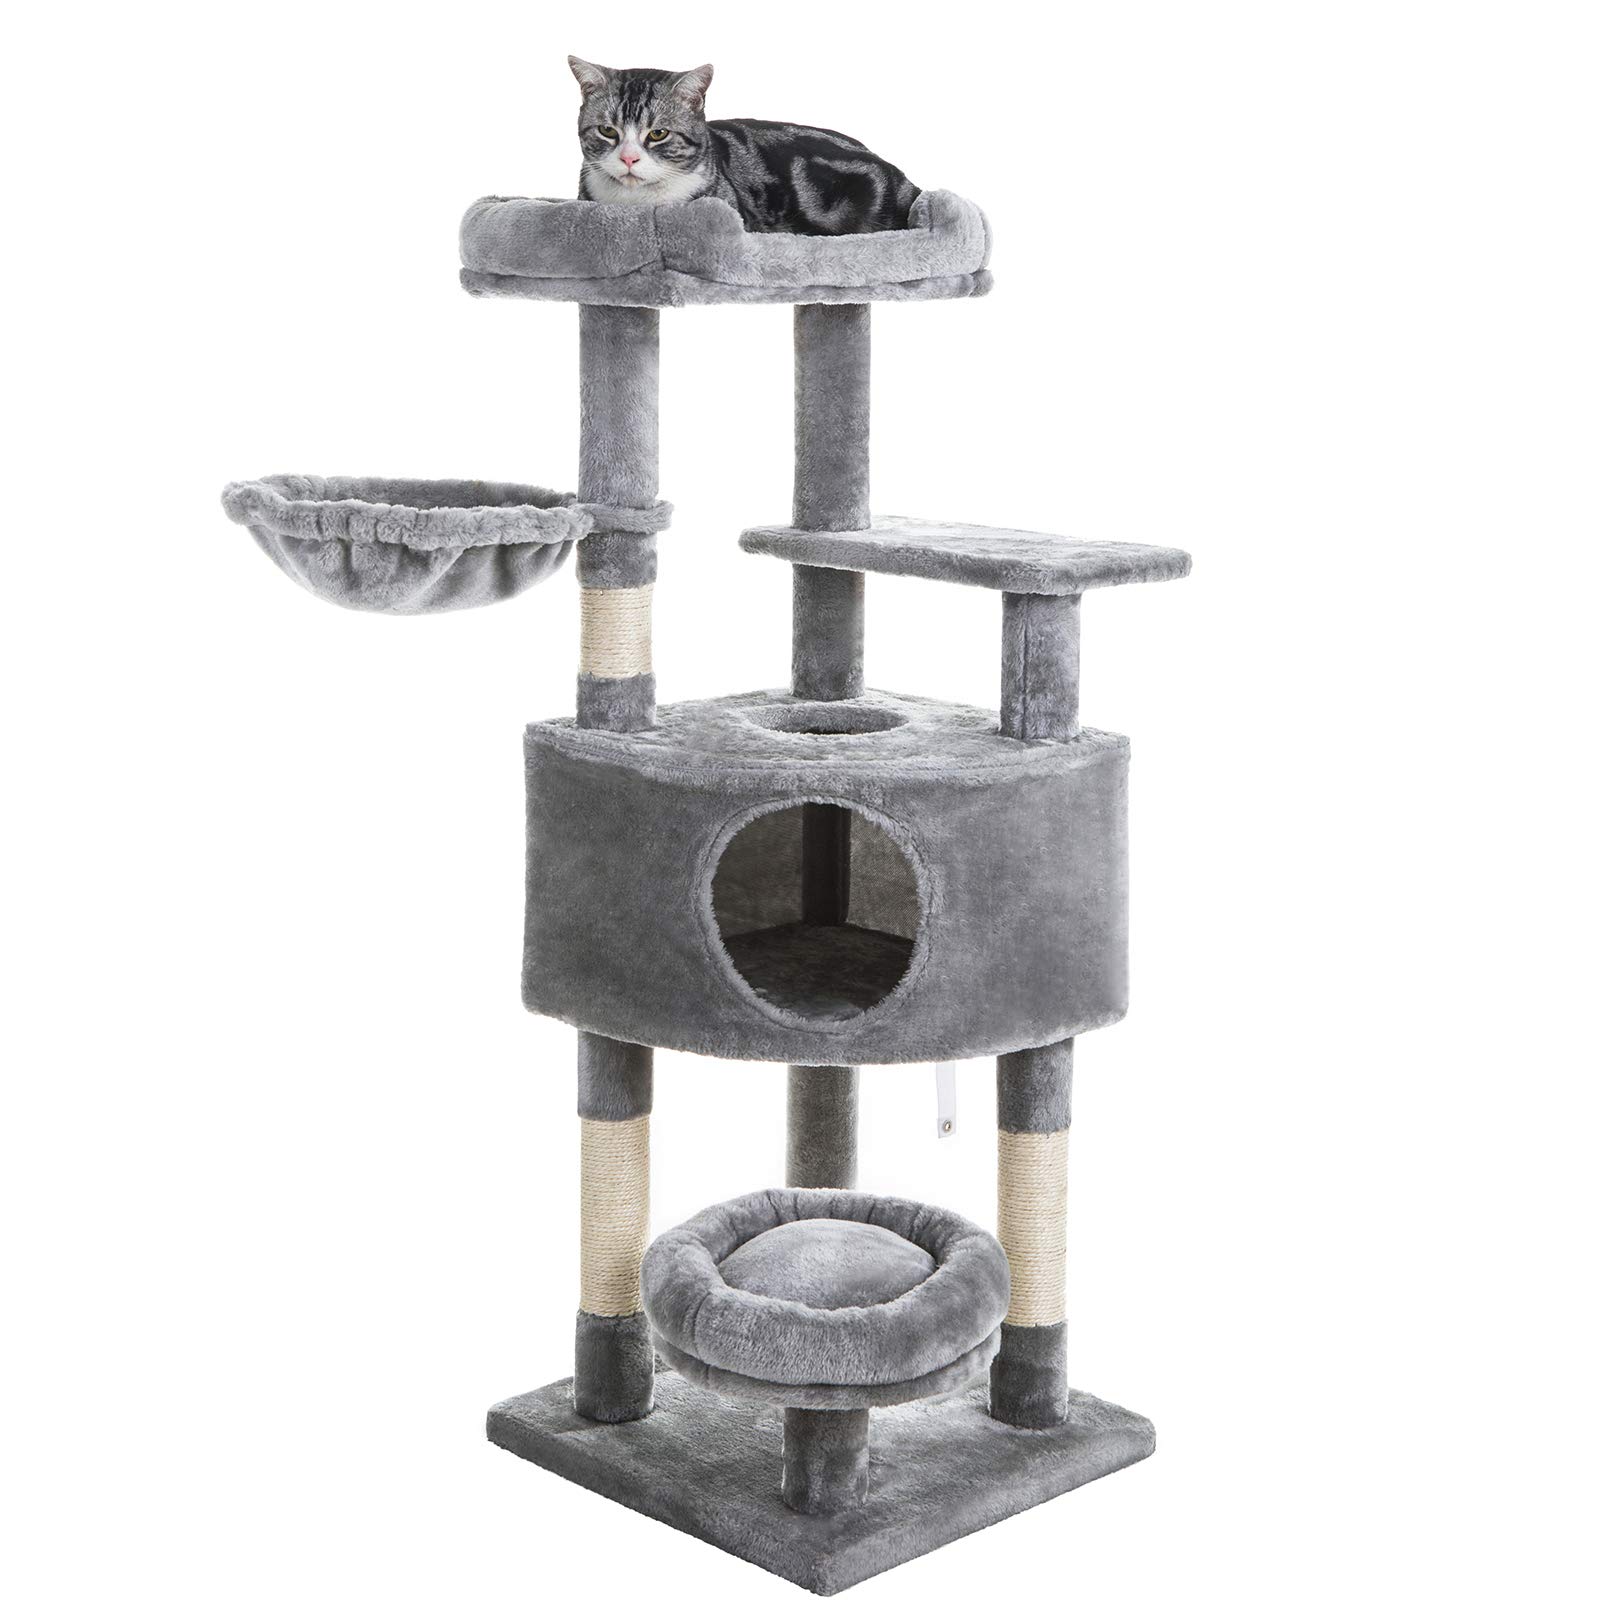 SUPERJARE Cat Tree Equipped with Spacious Condos